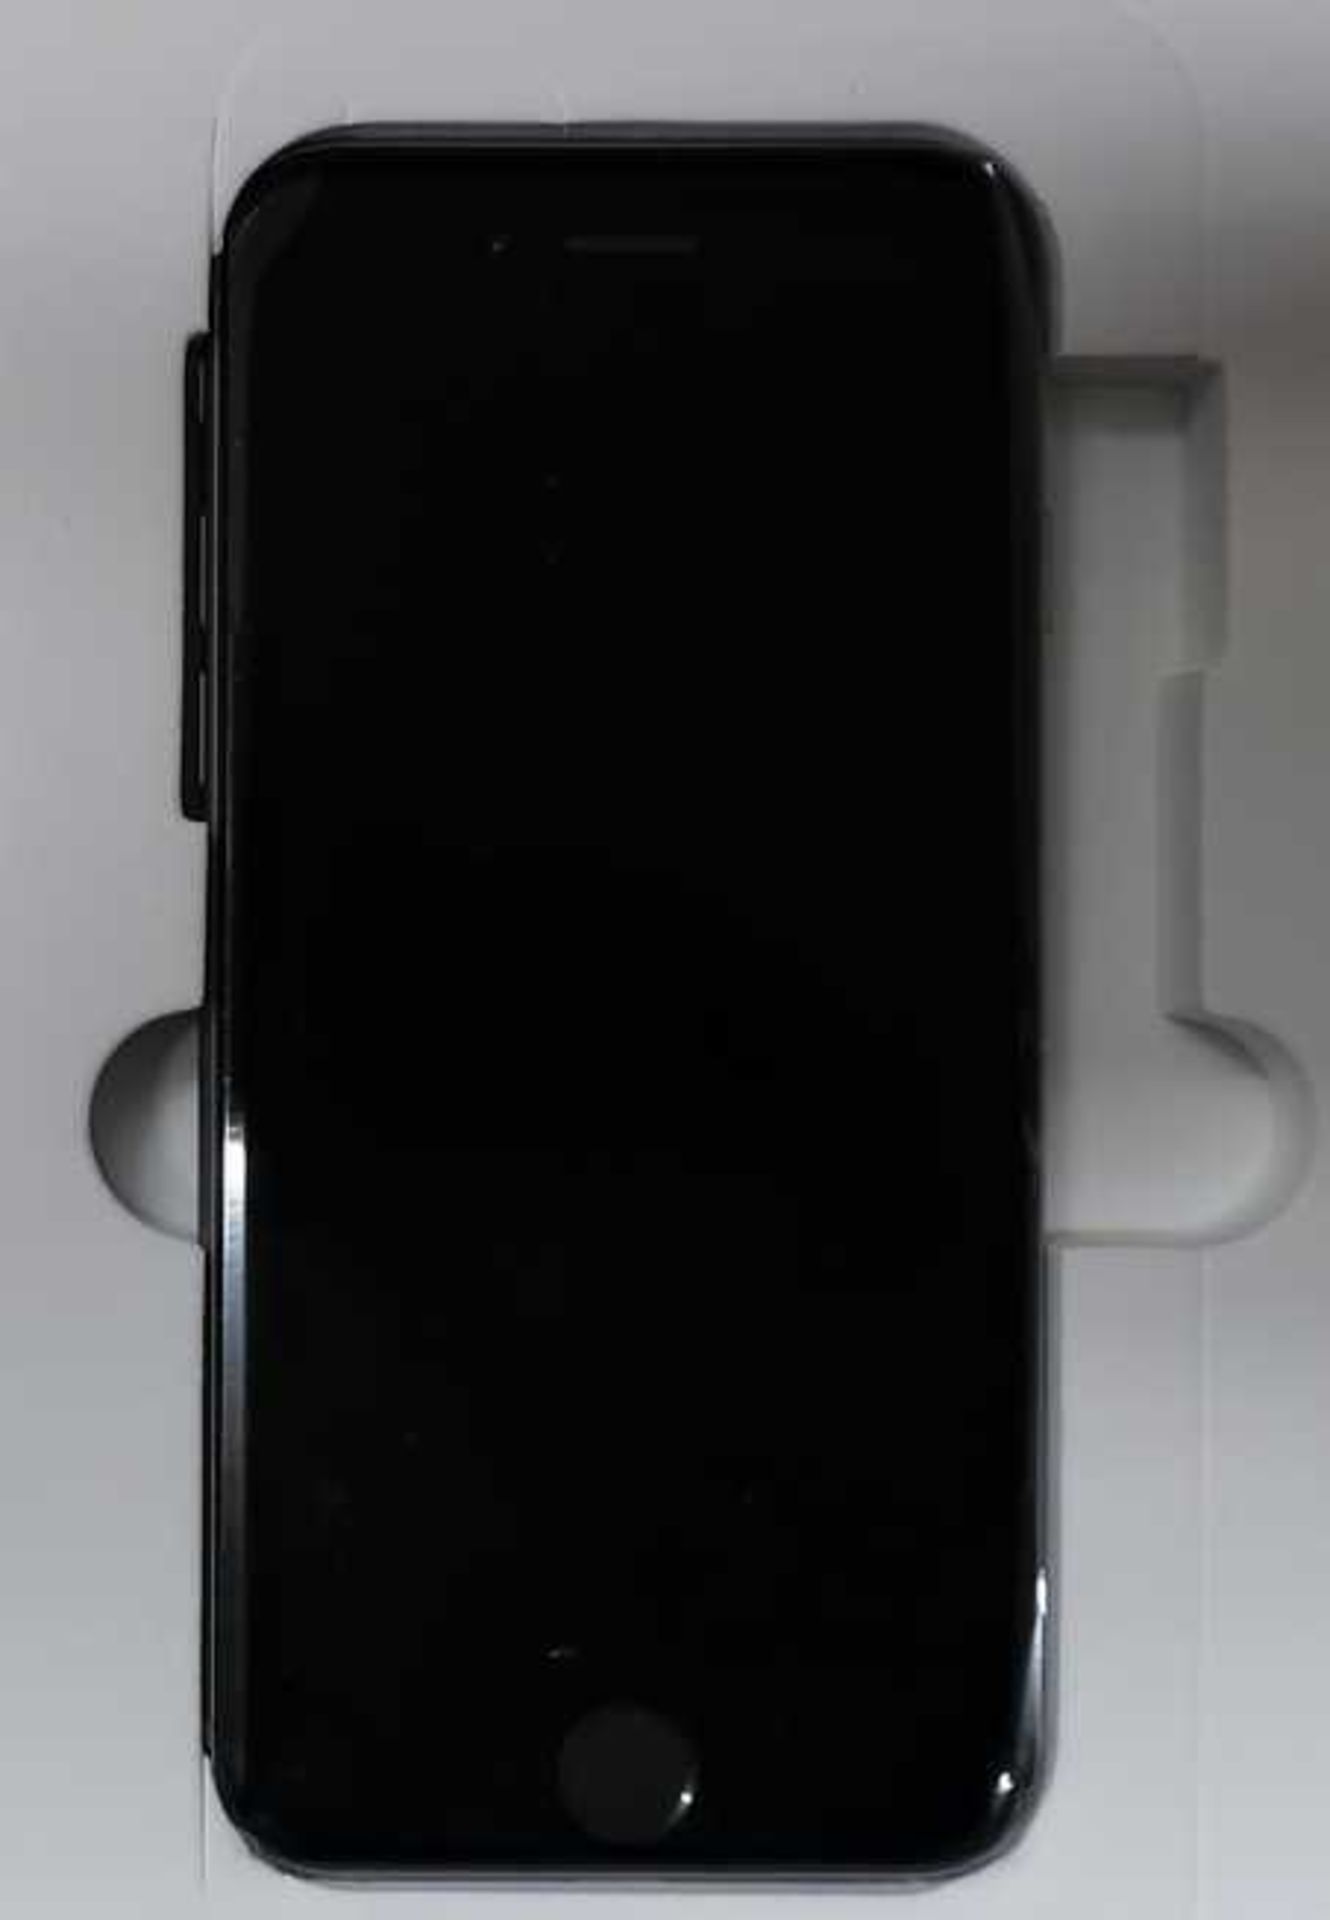 A refurbished Apple iPhone 6 A1586 16GB in Space Gray (IMEI:355403070957177) (No box or